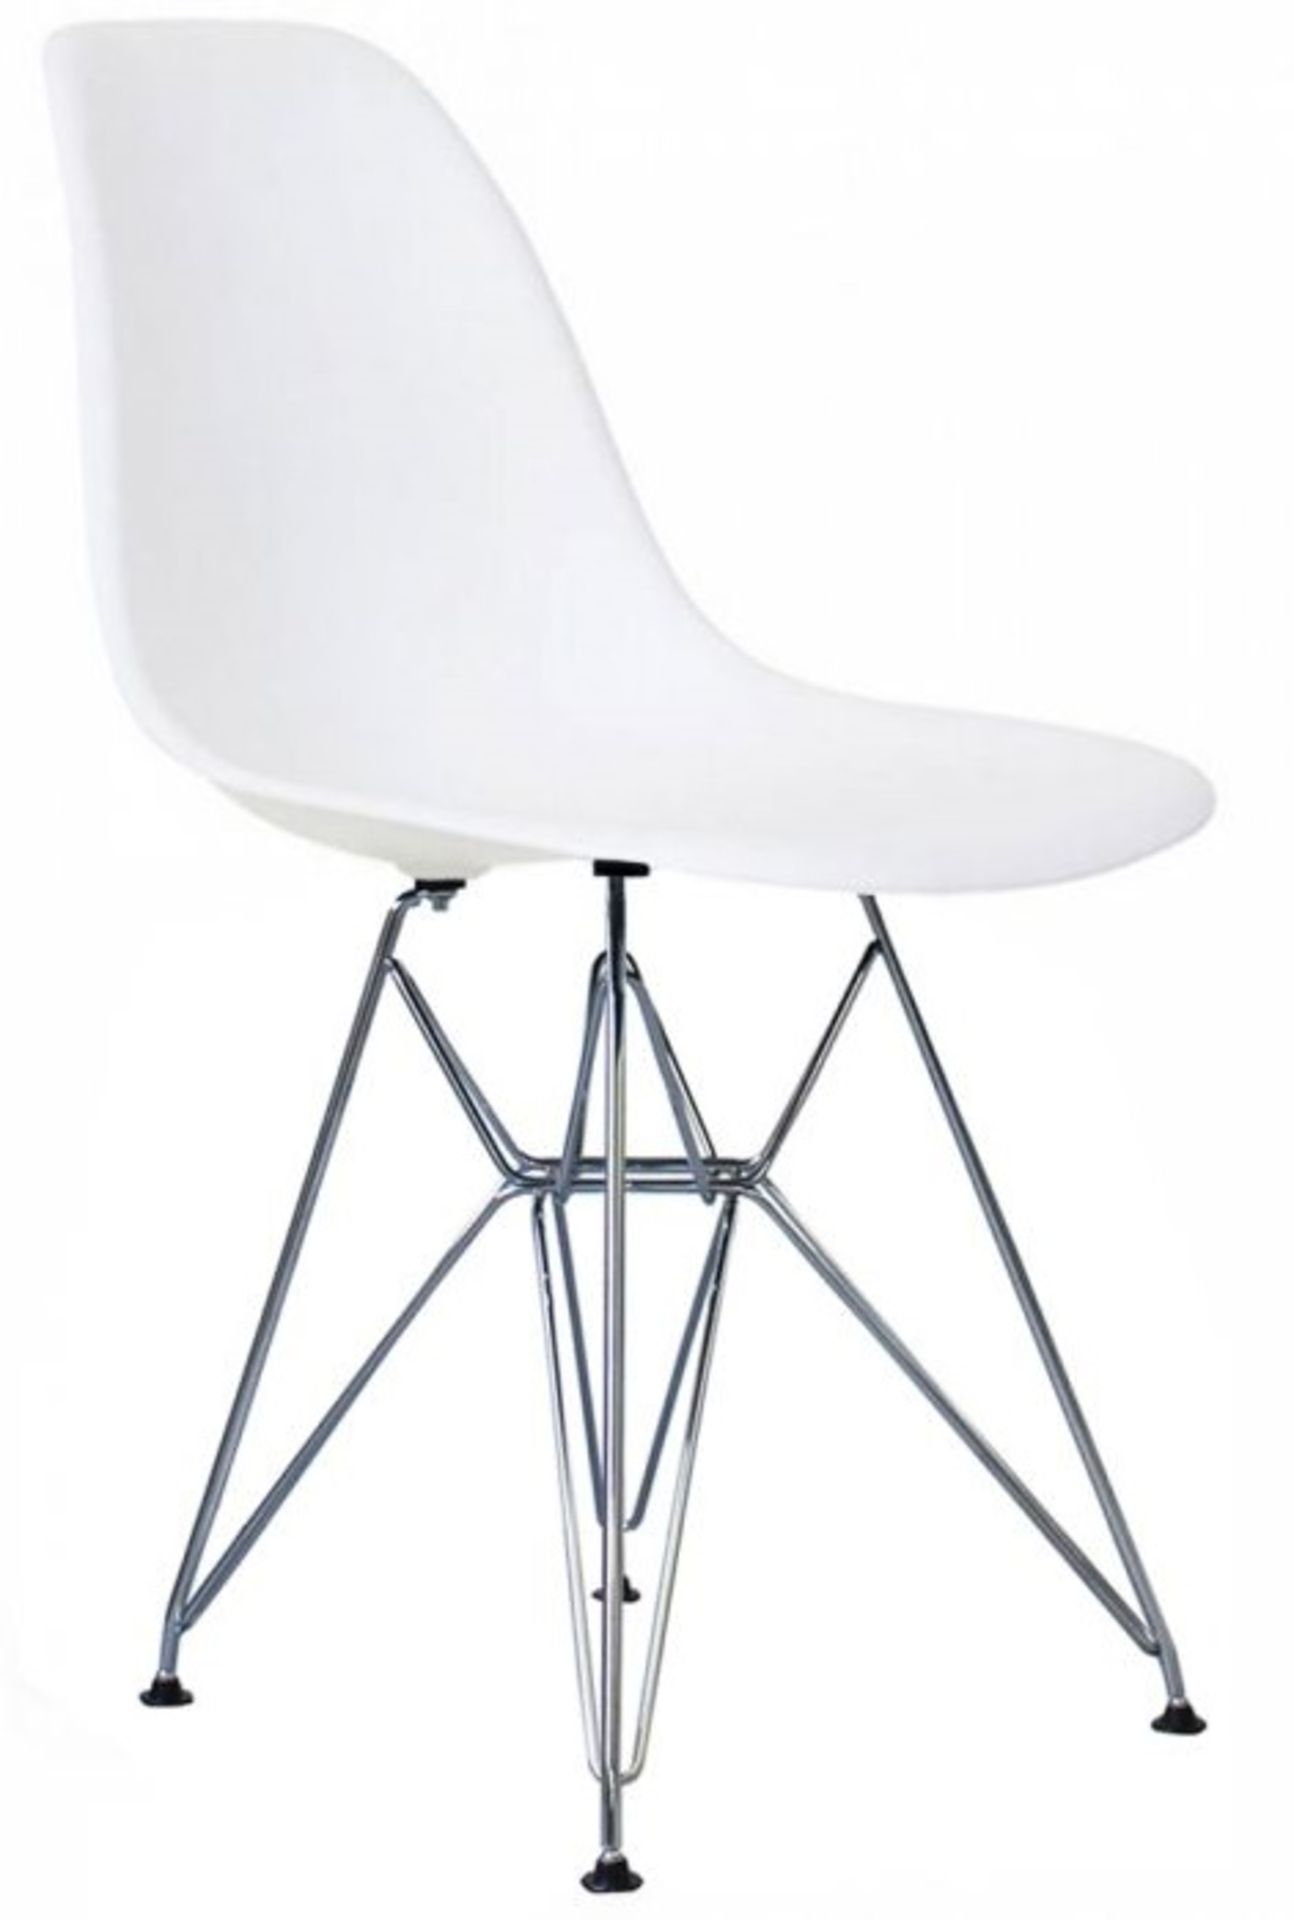 A Set Of 6 x Eames-Style Dining Chairs in White - Includes 2 x Carvers - Classic Design With Deep - Image 2 of 6